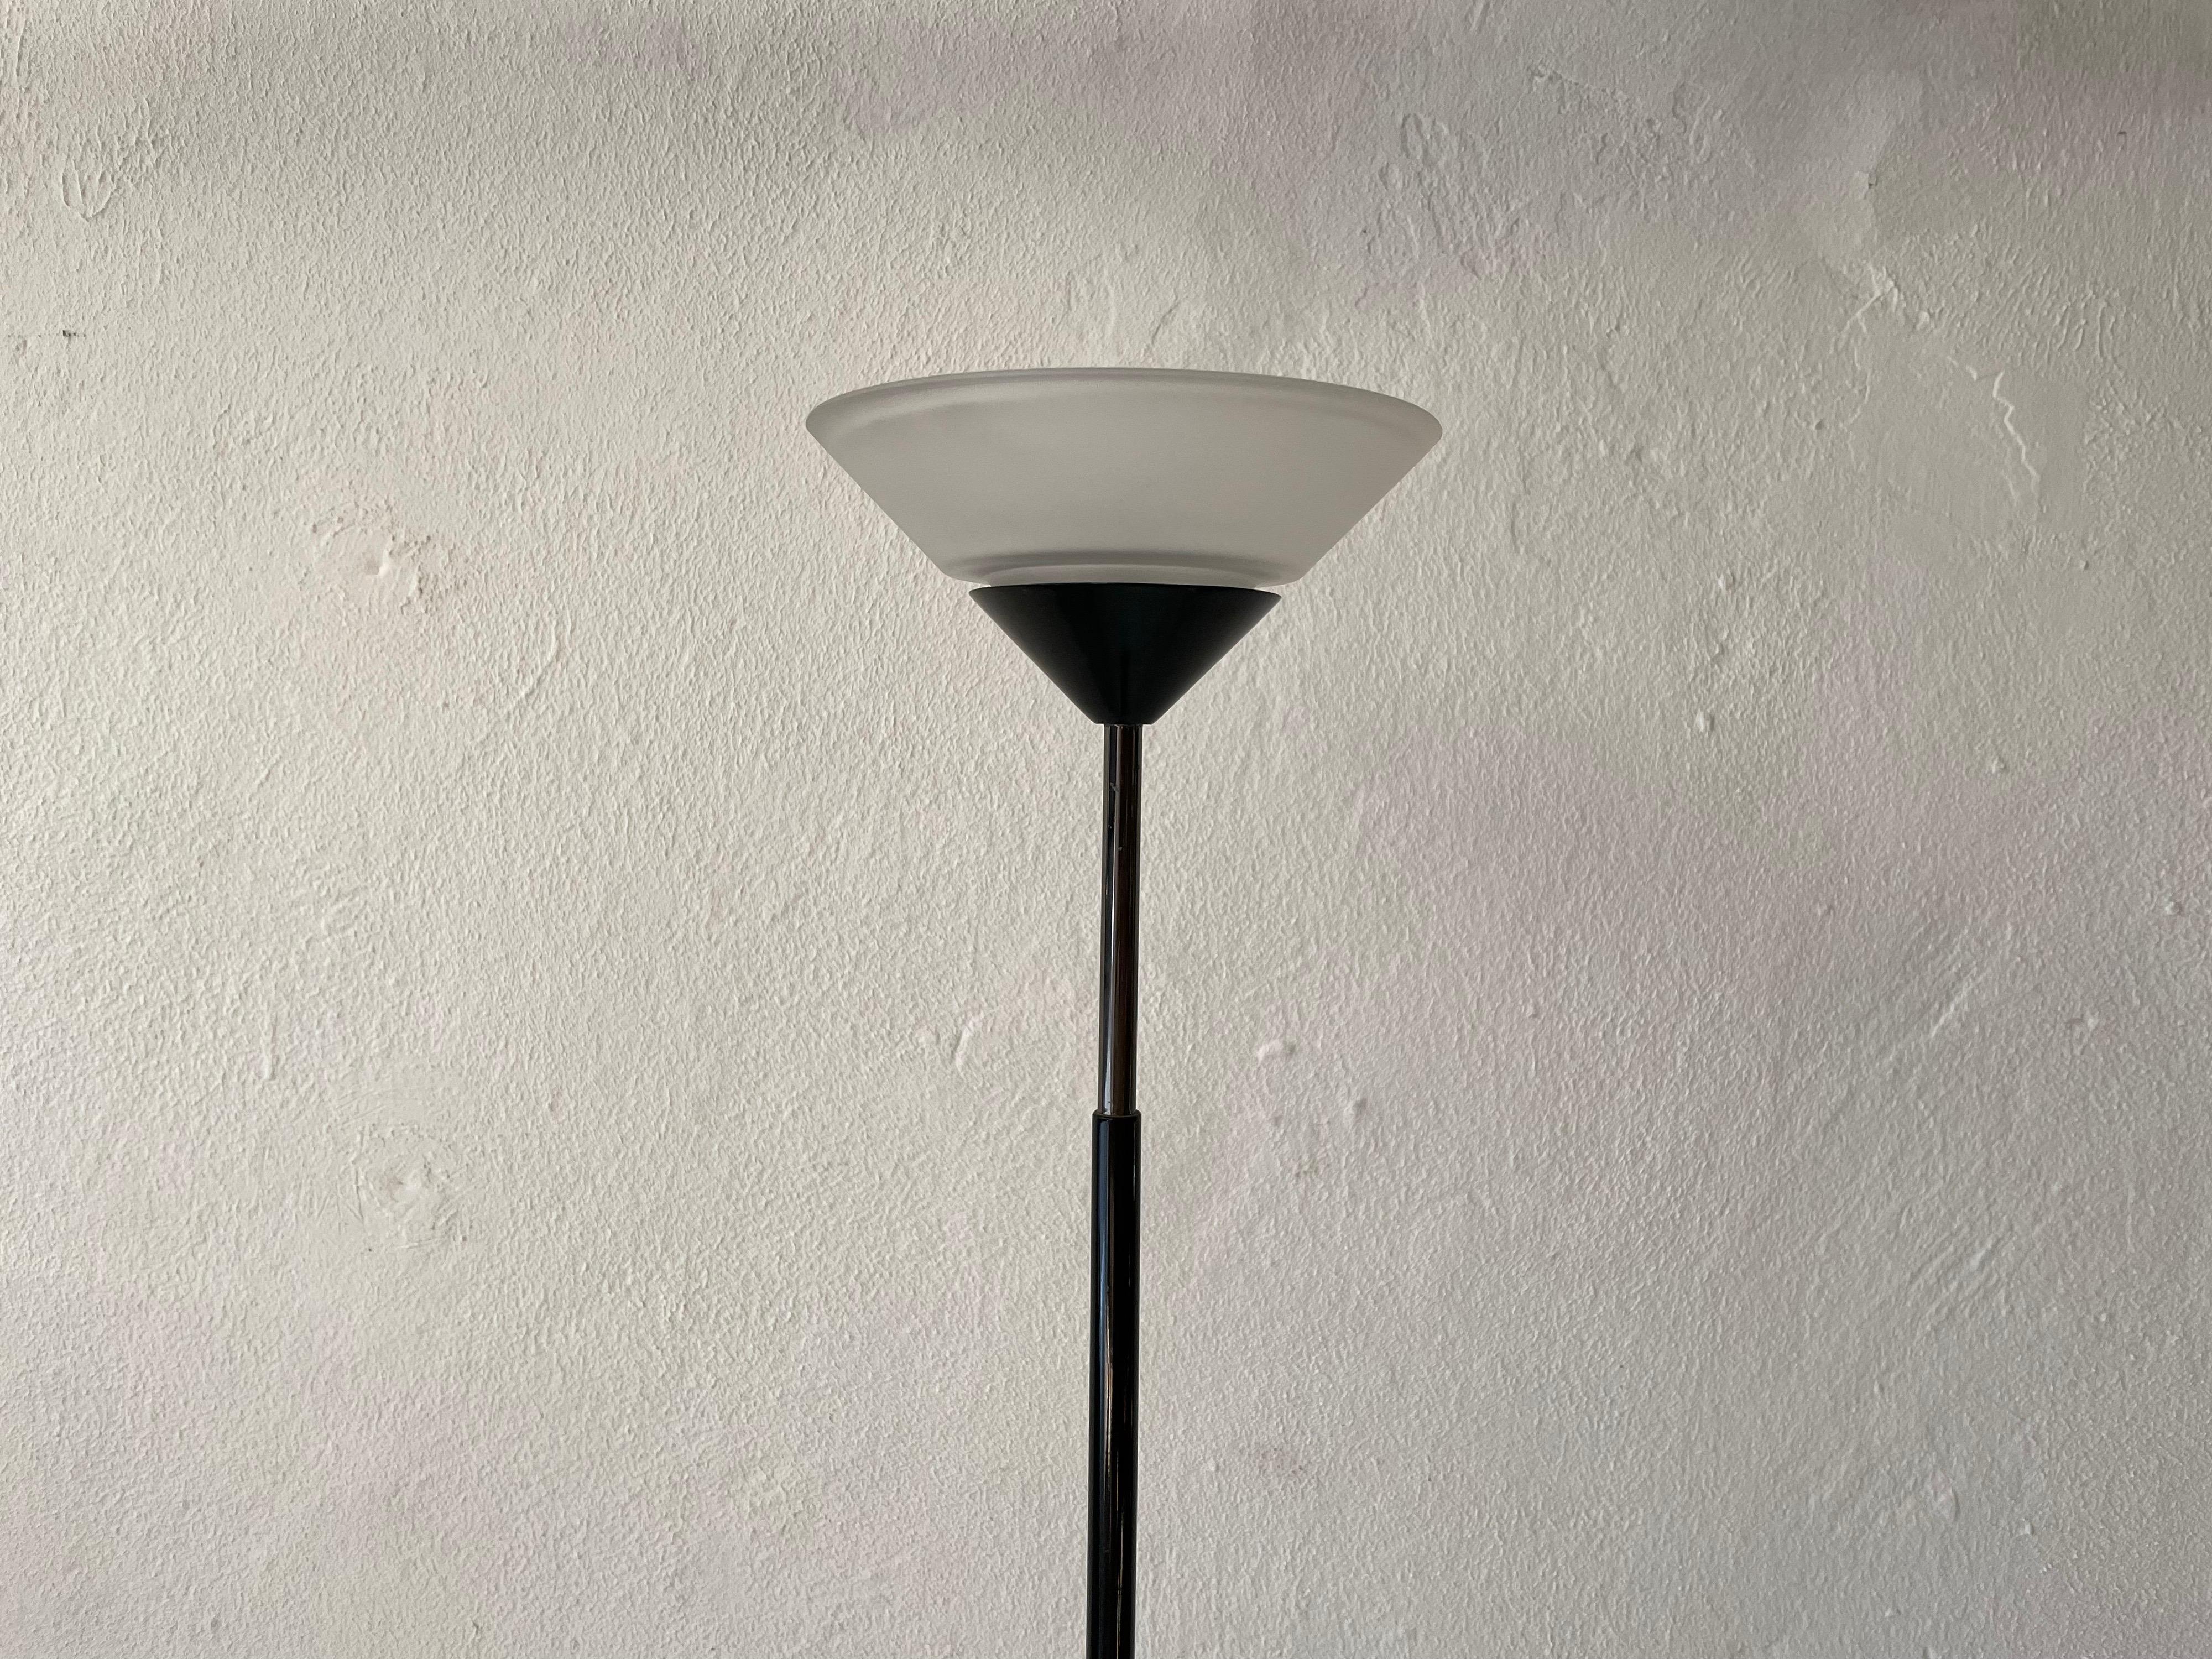 Conical glass and black metal floor lamp by Tronconi, 1970s, Italy

Lamp is in very good vintage condition.

*Lamp has a two-stage light function.

This lamp works with Halogen light bulb. 
Wired and suitable to use with 220V and 110V for all